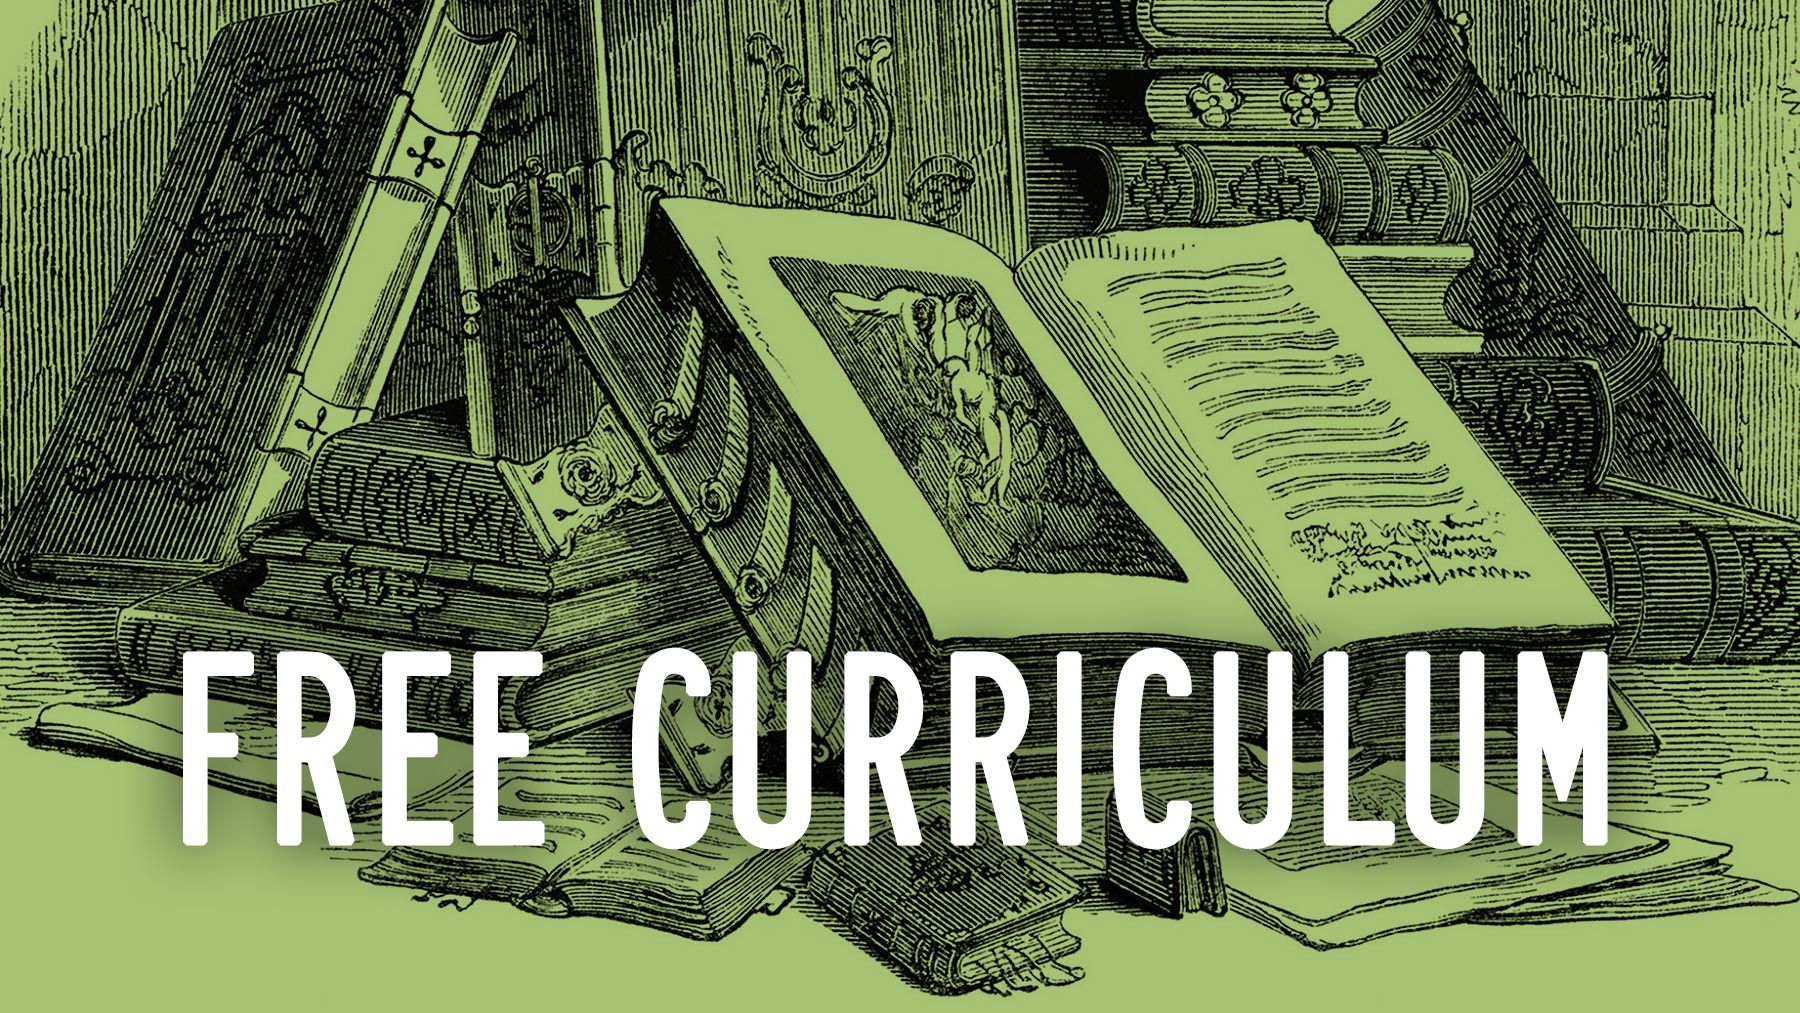 Vintage drawing of a stack of books, with the words FREE CURRICULUM